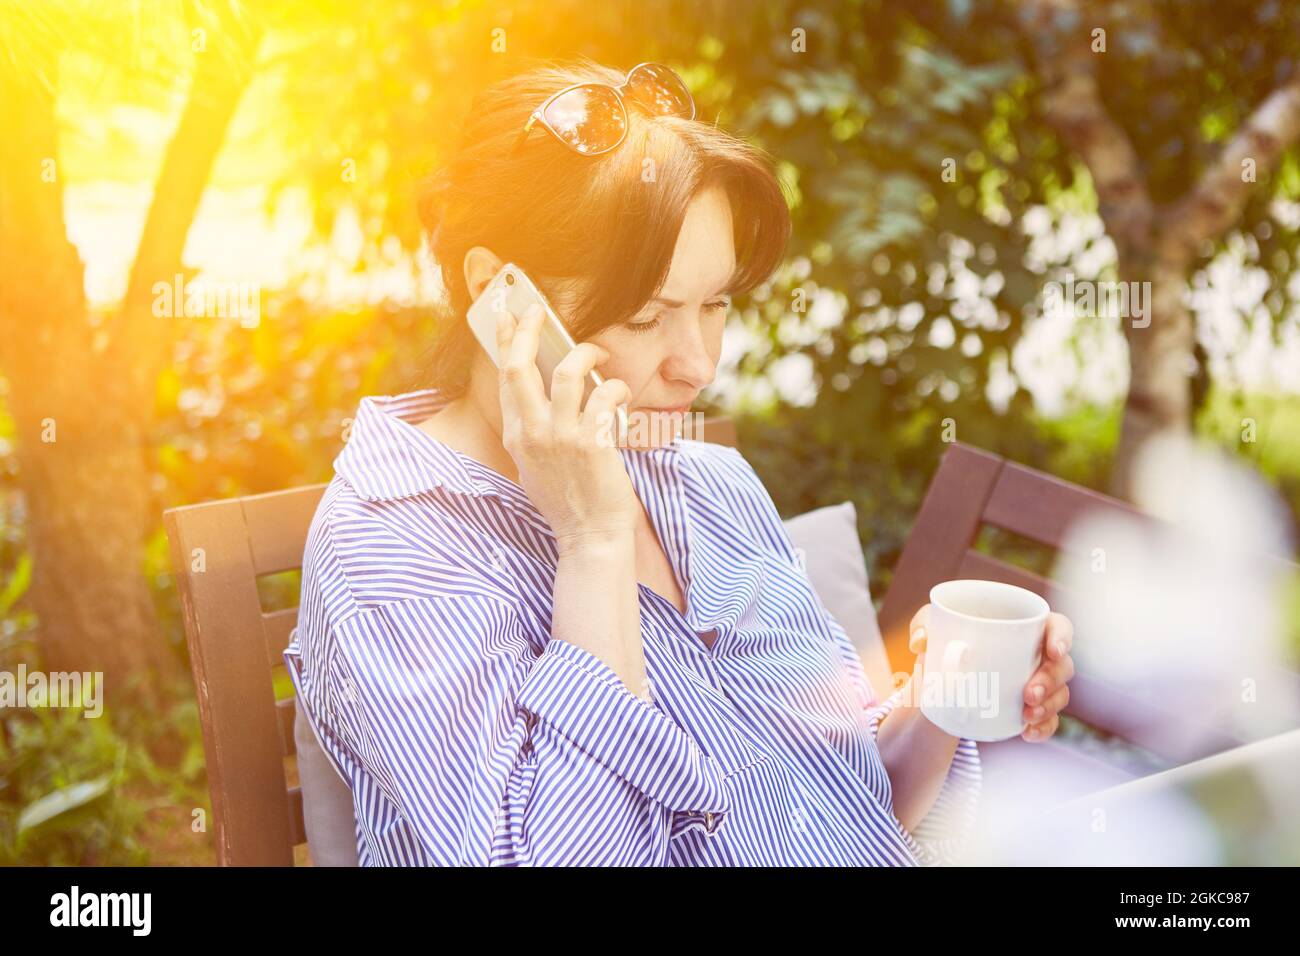 Woman talking on the phone on smartphone in the garden hangs on hold while waiting Stock Photo